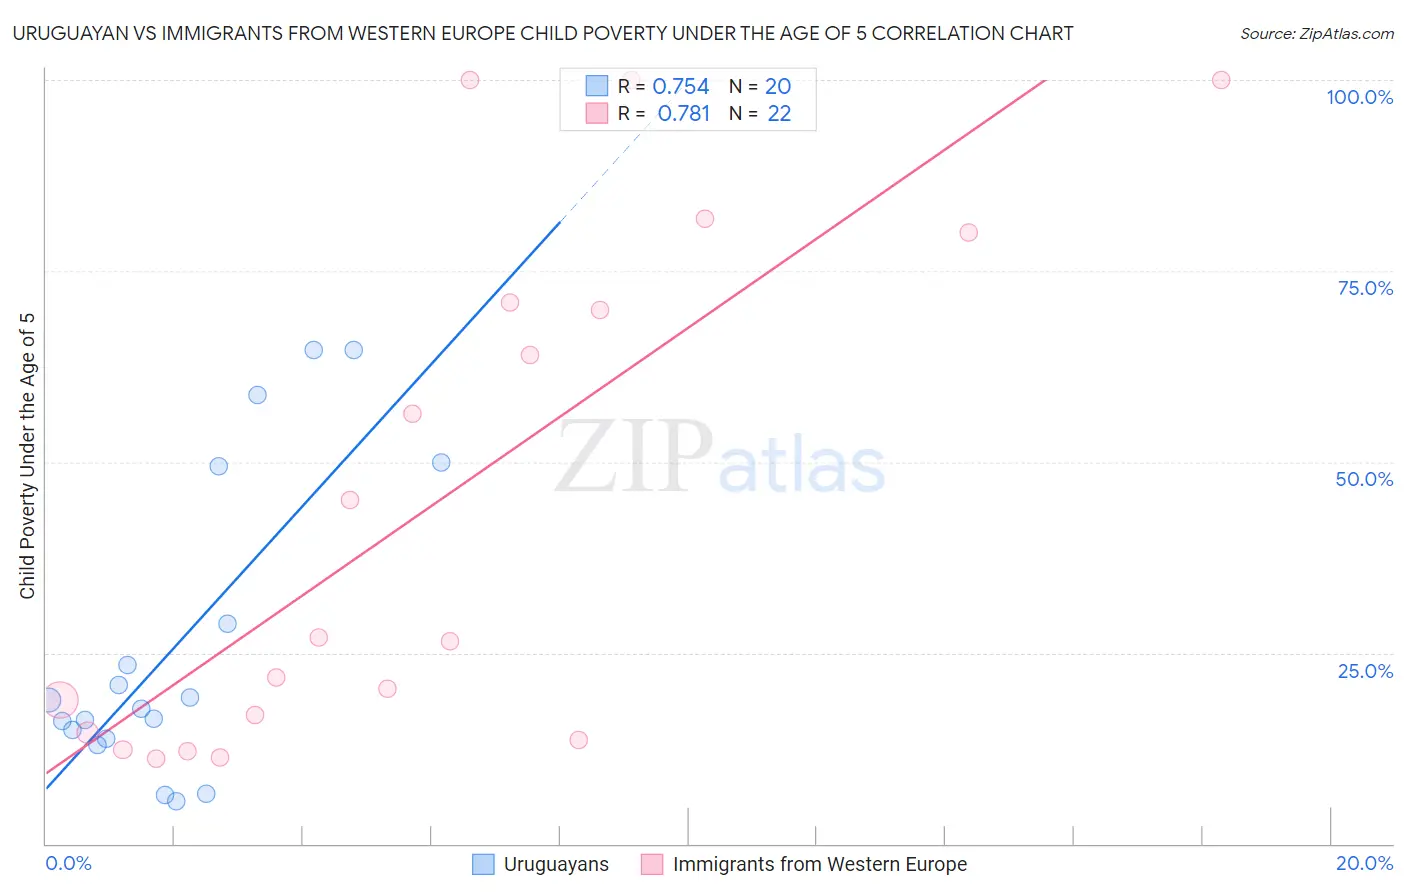 Uruguayan vs Immigrants from Western Europe Child Poverty Under the Age of 5